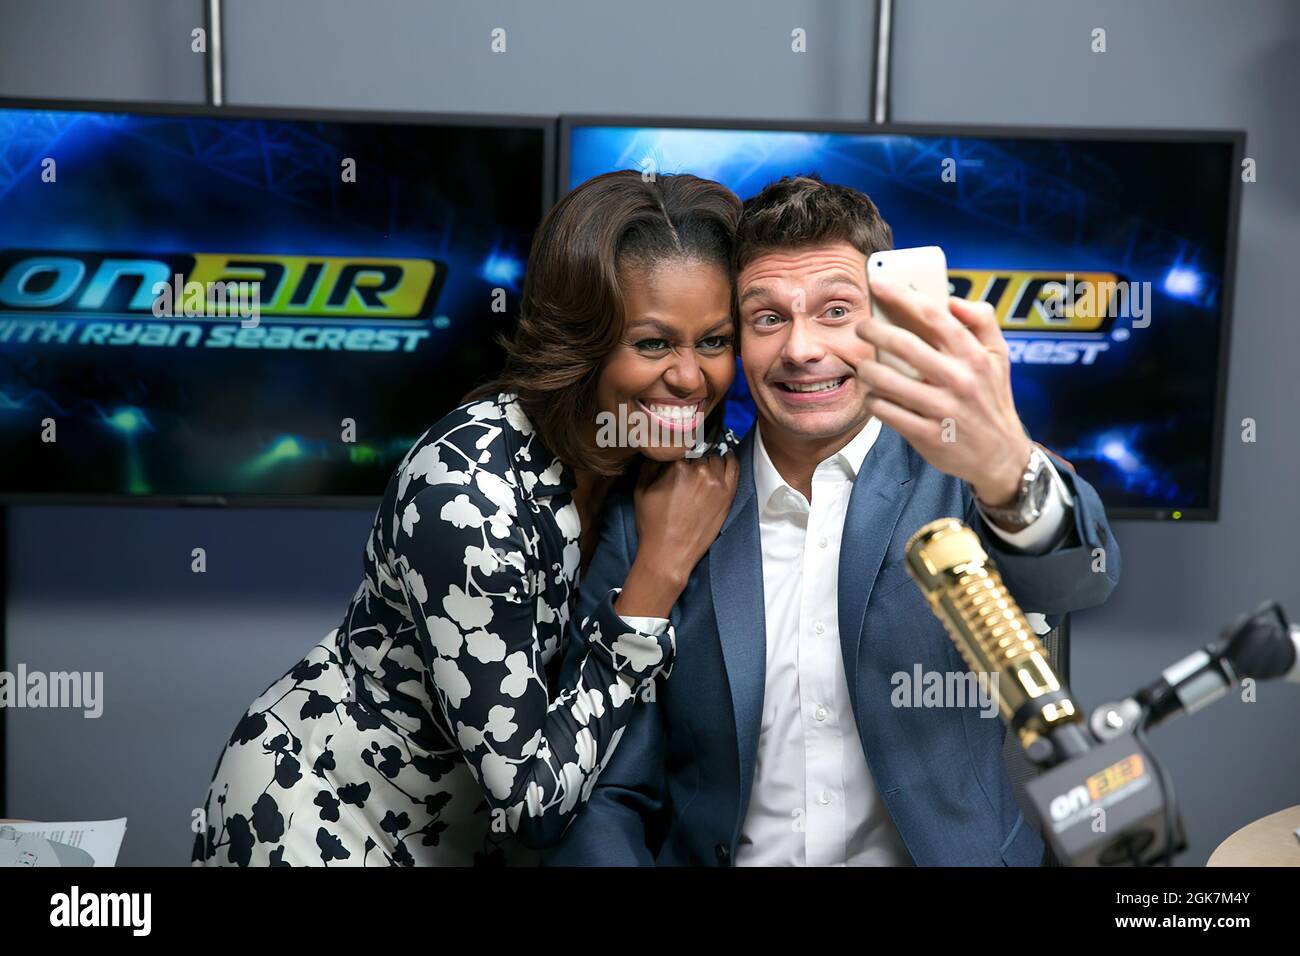 First Lady Michelle Obama poses for a selfie with Ryan Seacrest after taping a 'Let's Move!' interview at E! Networks in Los Angeles, Calif., Jan. 29, 2014. (Official White House Photo by Lawrence Jackson) This official White House photograph is being made available only for publication by news organizations and/or for personal use printing by the subject(s) of the photograph. The photograph may not be manipulated in any way and may not be used in commercial or political materials, advertisements, emails, products, promotions that in any way suggests approval or endorsement of the President, t Stock Photo